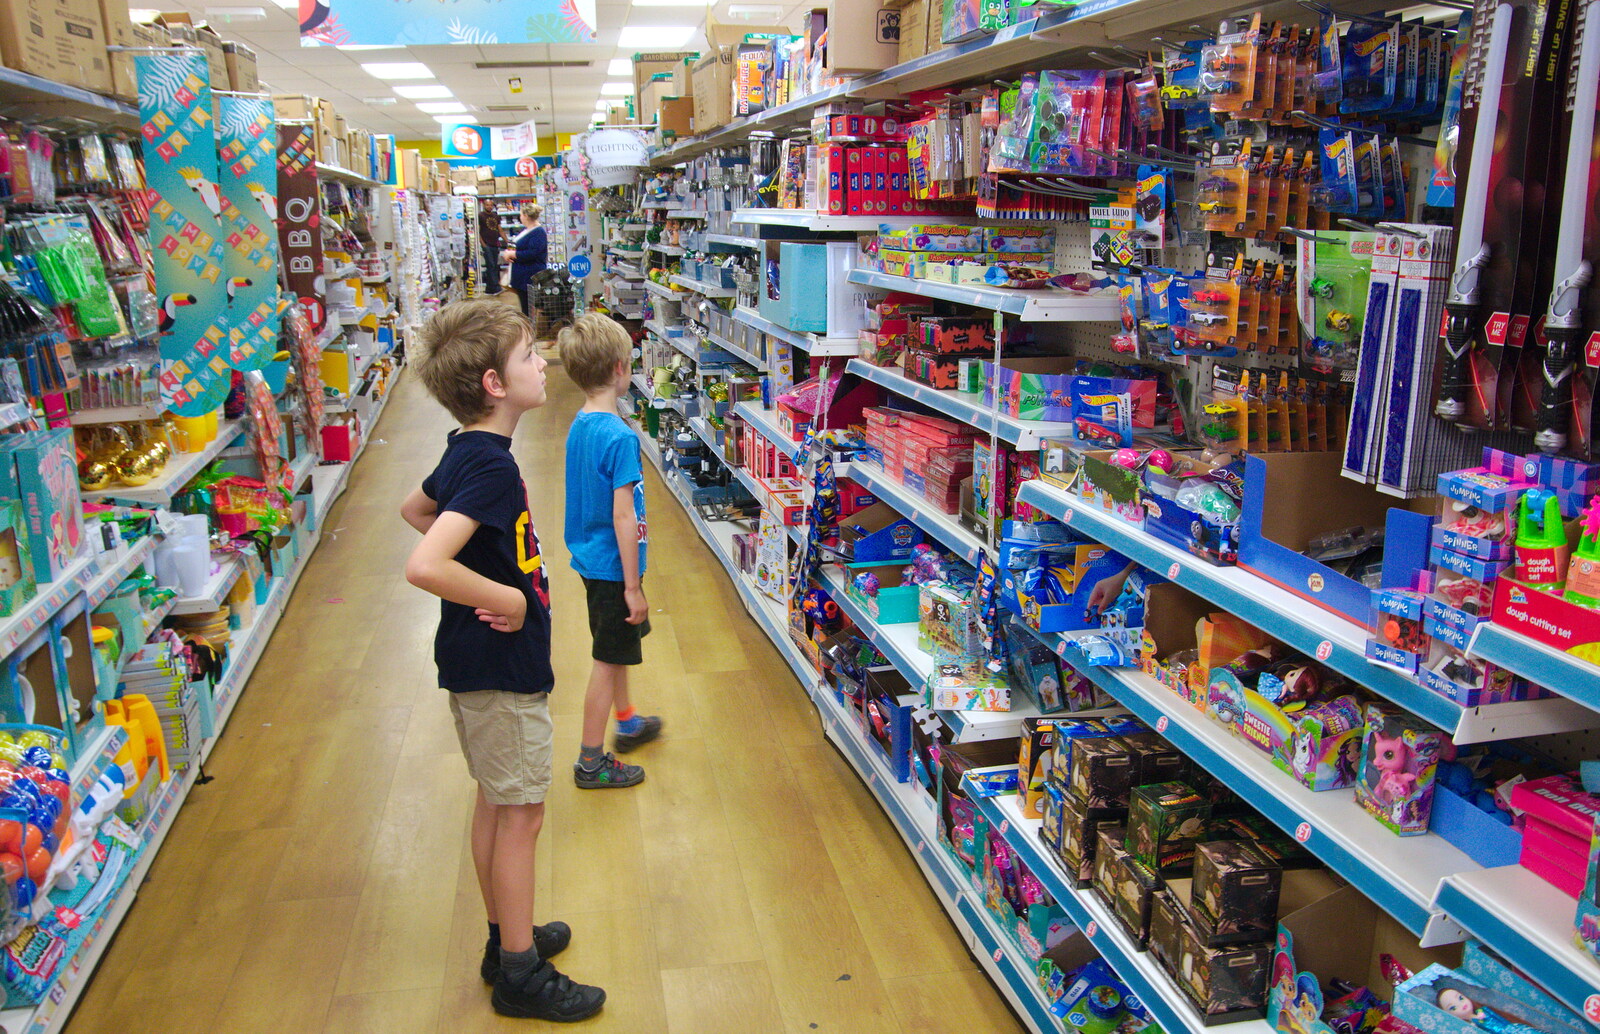 The boys spend their pocket money in Poundland from The Diss Carnival 2019, Diss, Norfolk - 9th June 2019